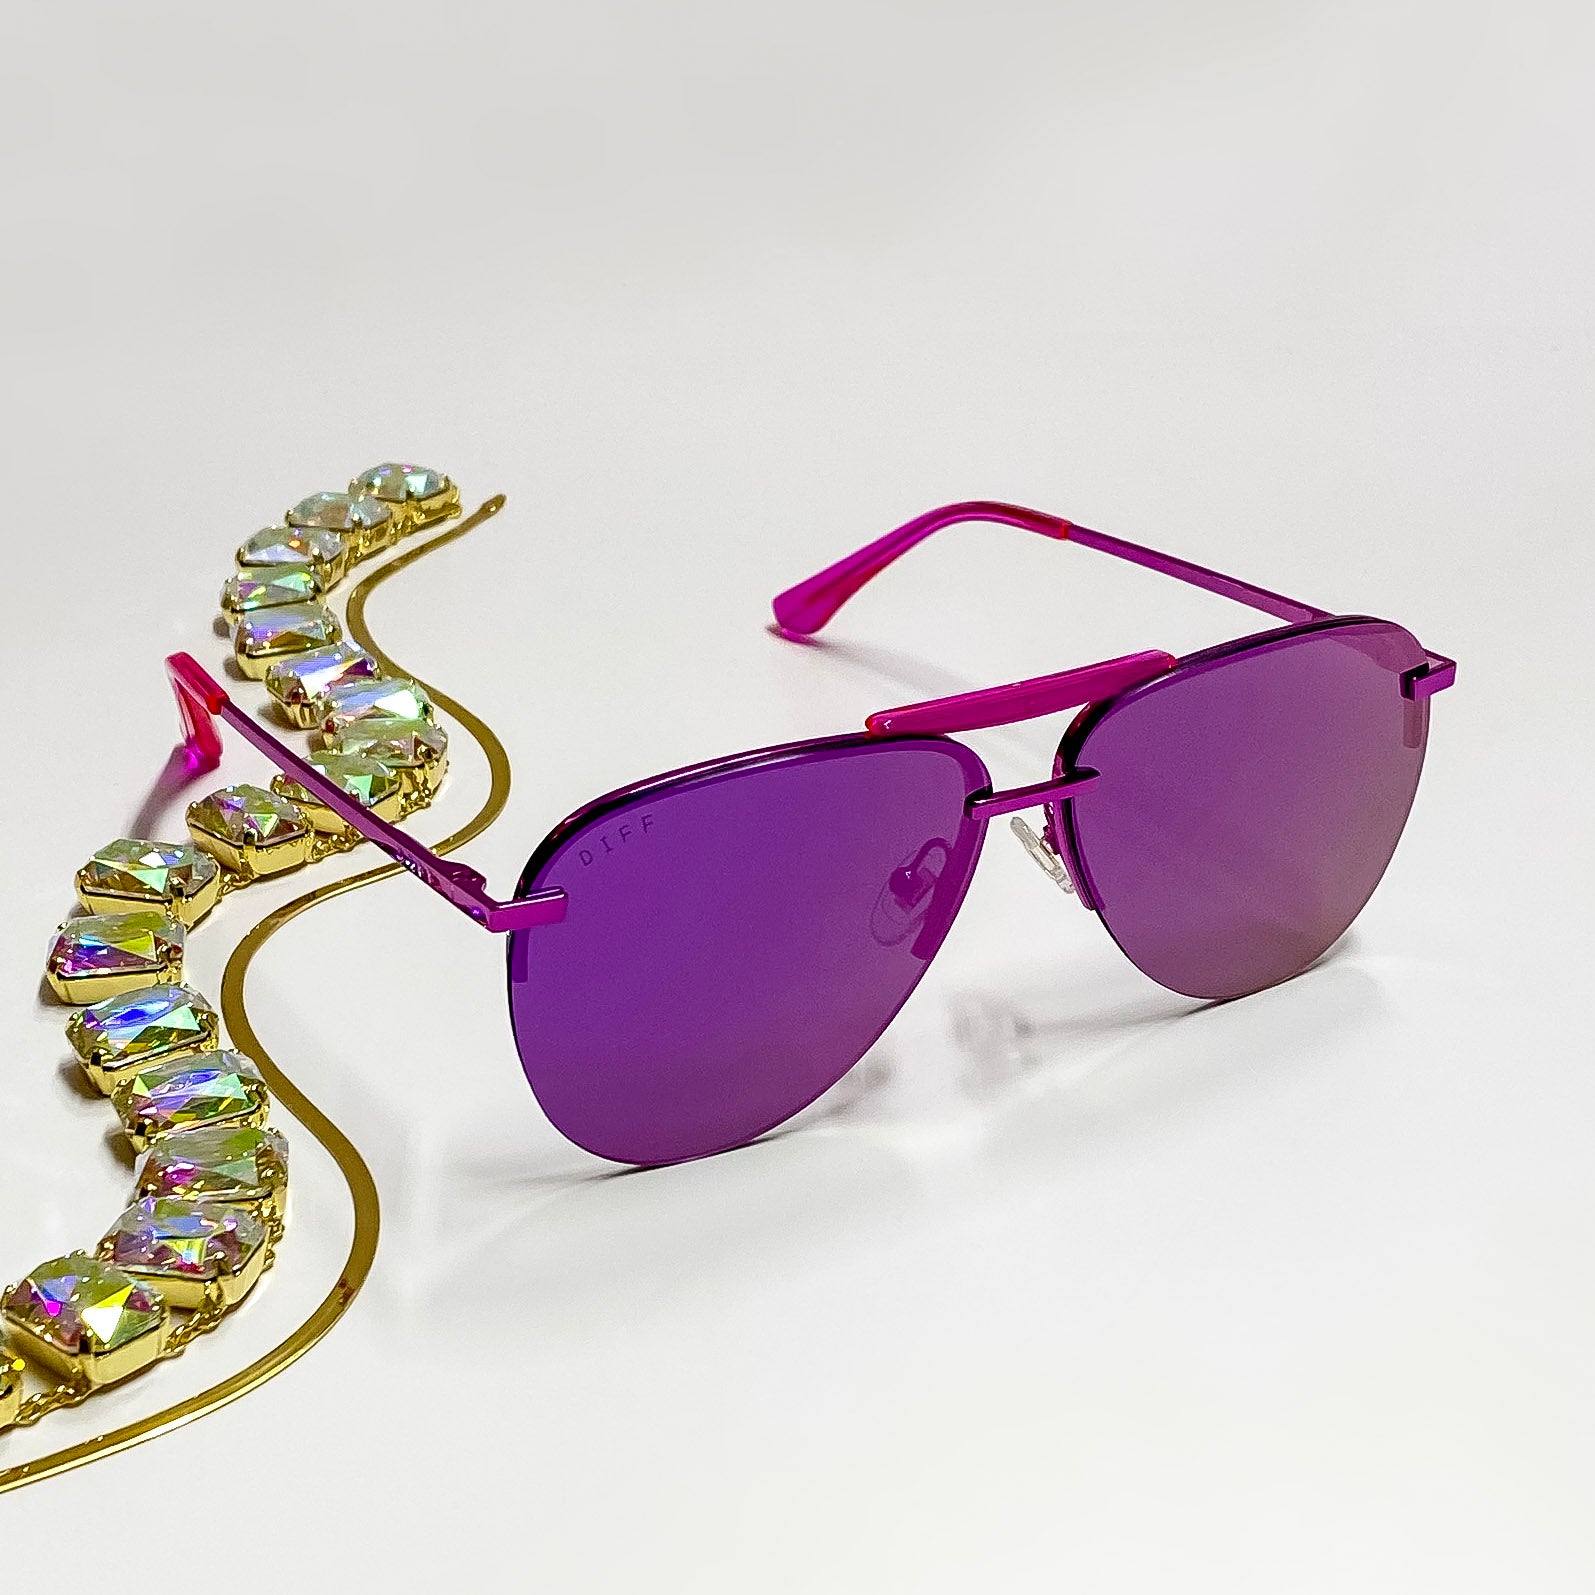 A pair of pink metallic aviator style sunglasses. (Whole sunglass is pink)